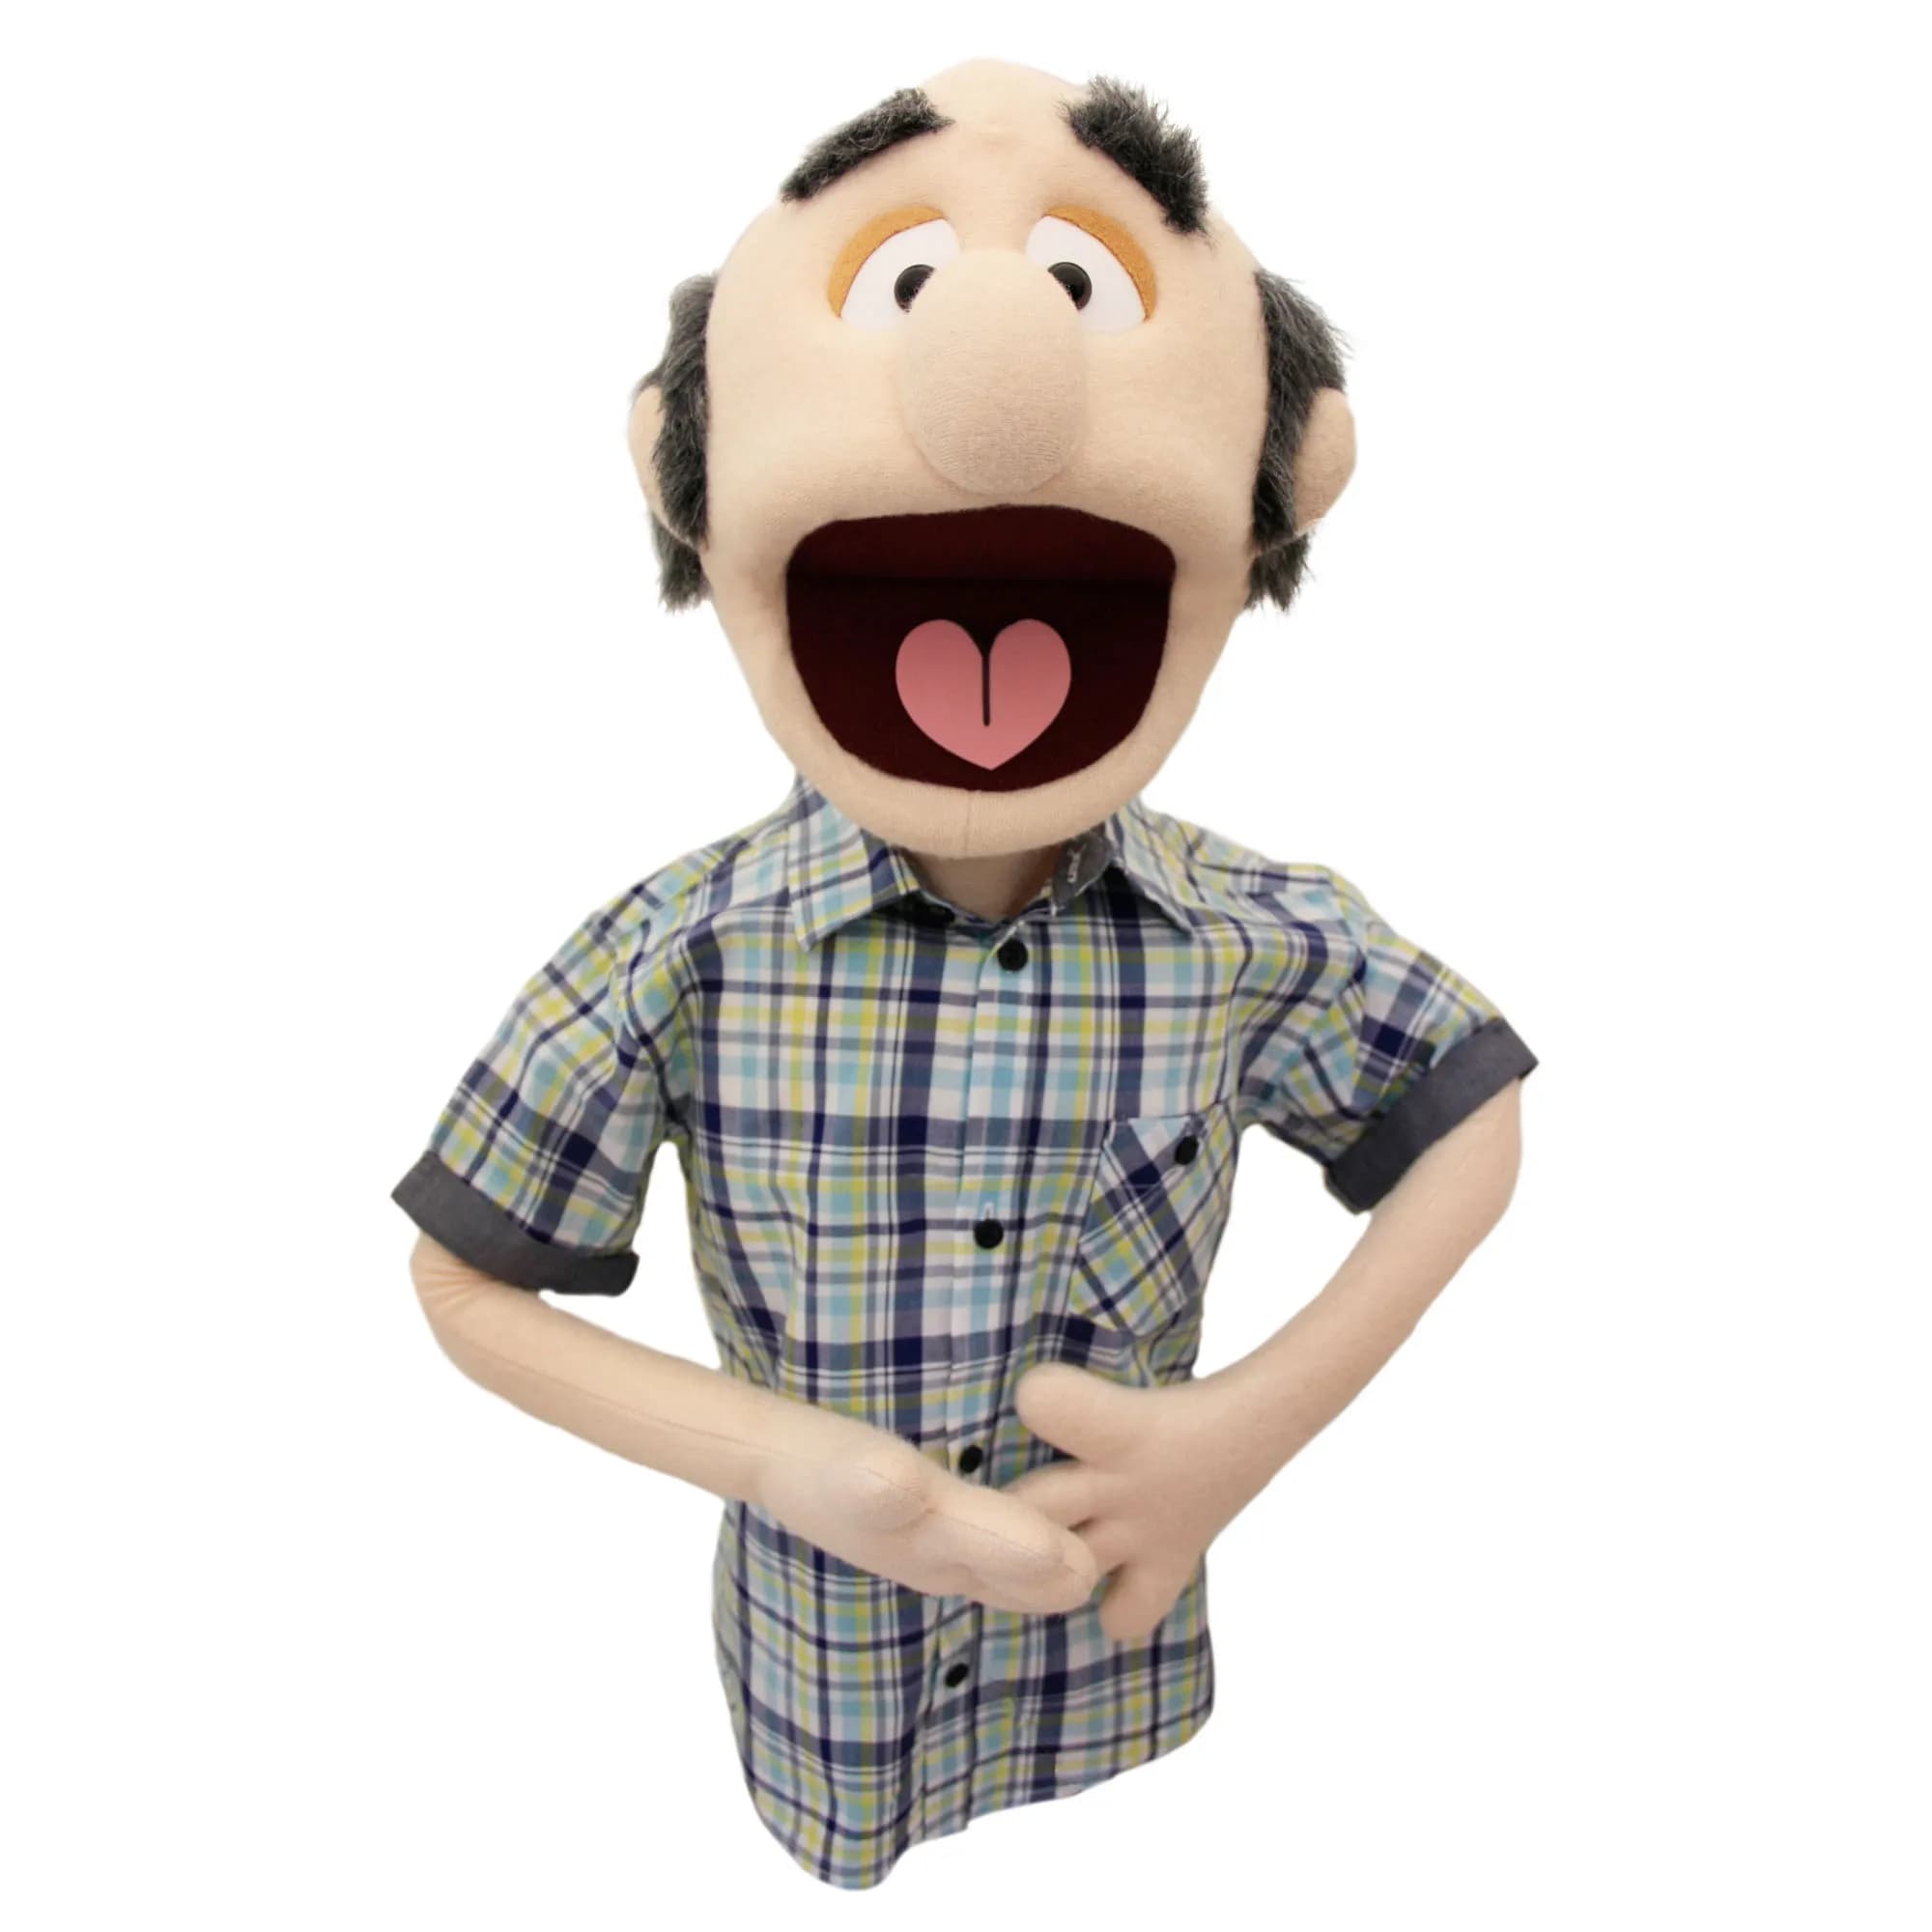 Quentin - Pro People Puppet